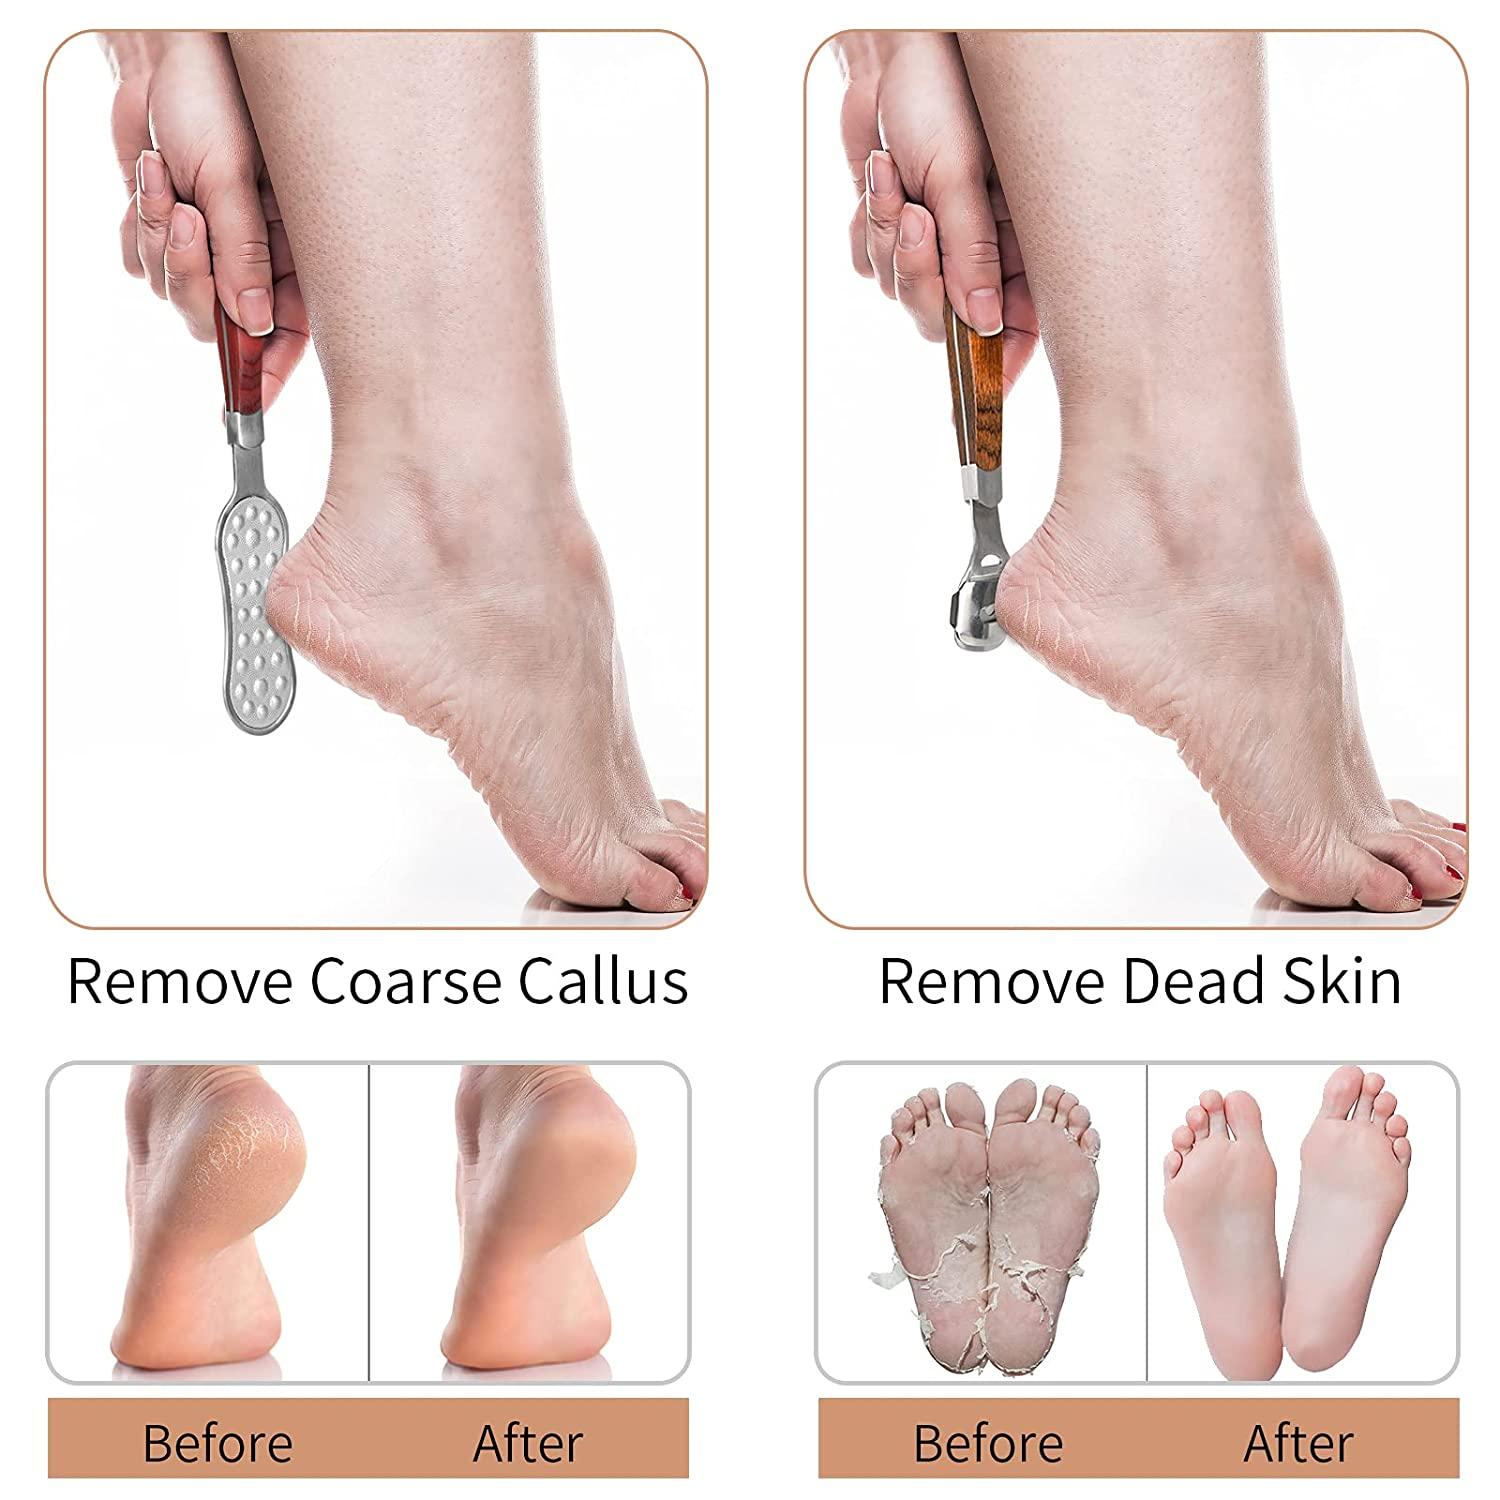 Callus Remover for Feet: Electric Foot Scrubber JTLMEEN Waterproof Pedicure  Tools Foot File Kit - Rechargeable Feet Scrubber Dead Skin Remover with  Adjustable Speed Remove Cracked Hard Skin Black